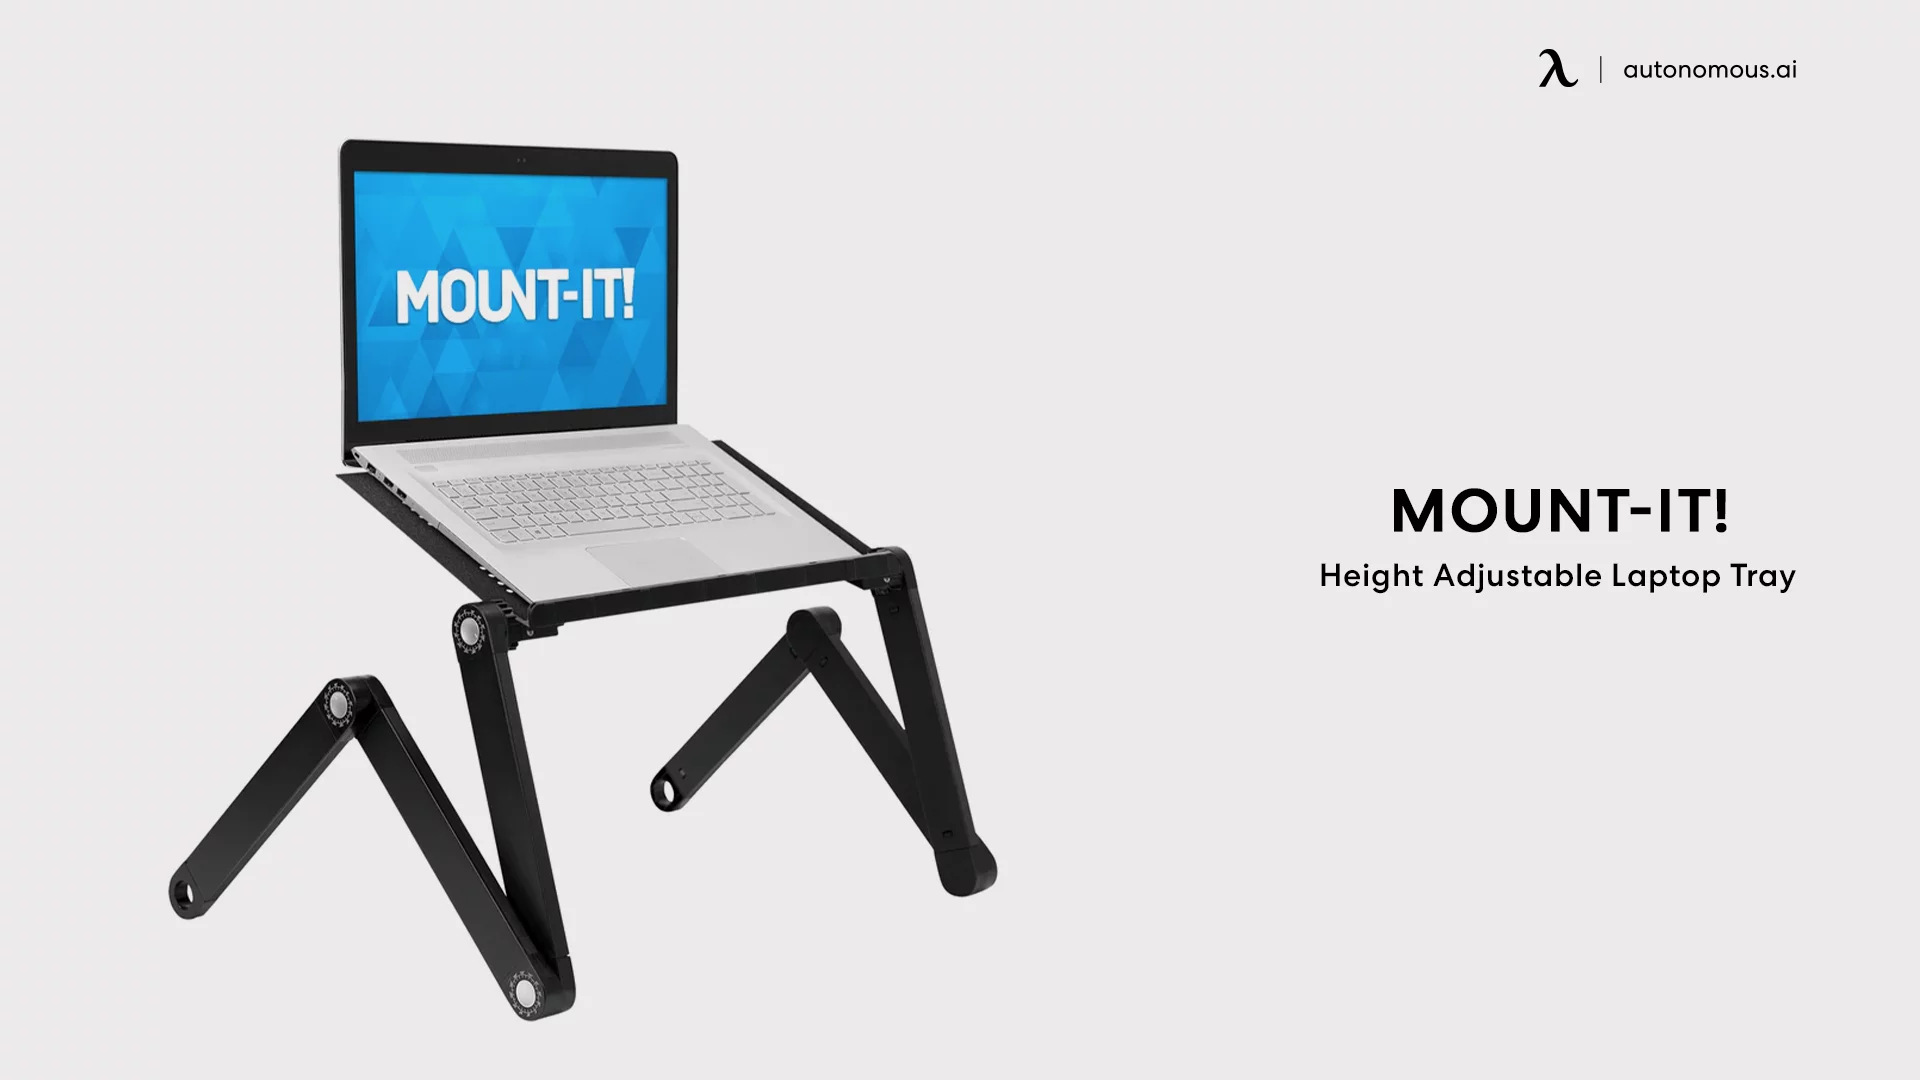 Height Adjustable Laptop Tray by Mount-It!